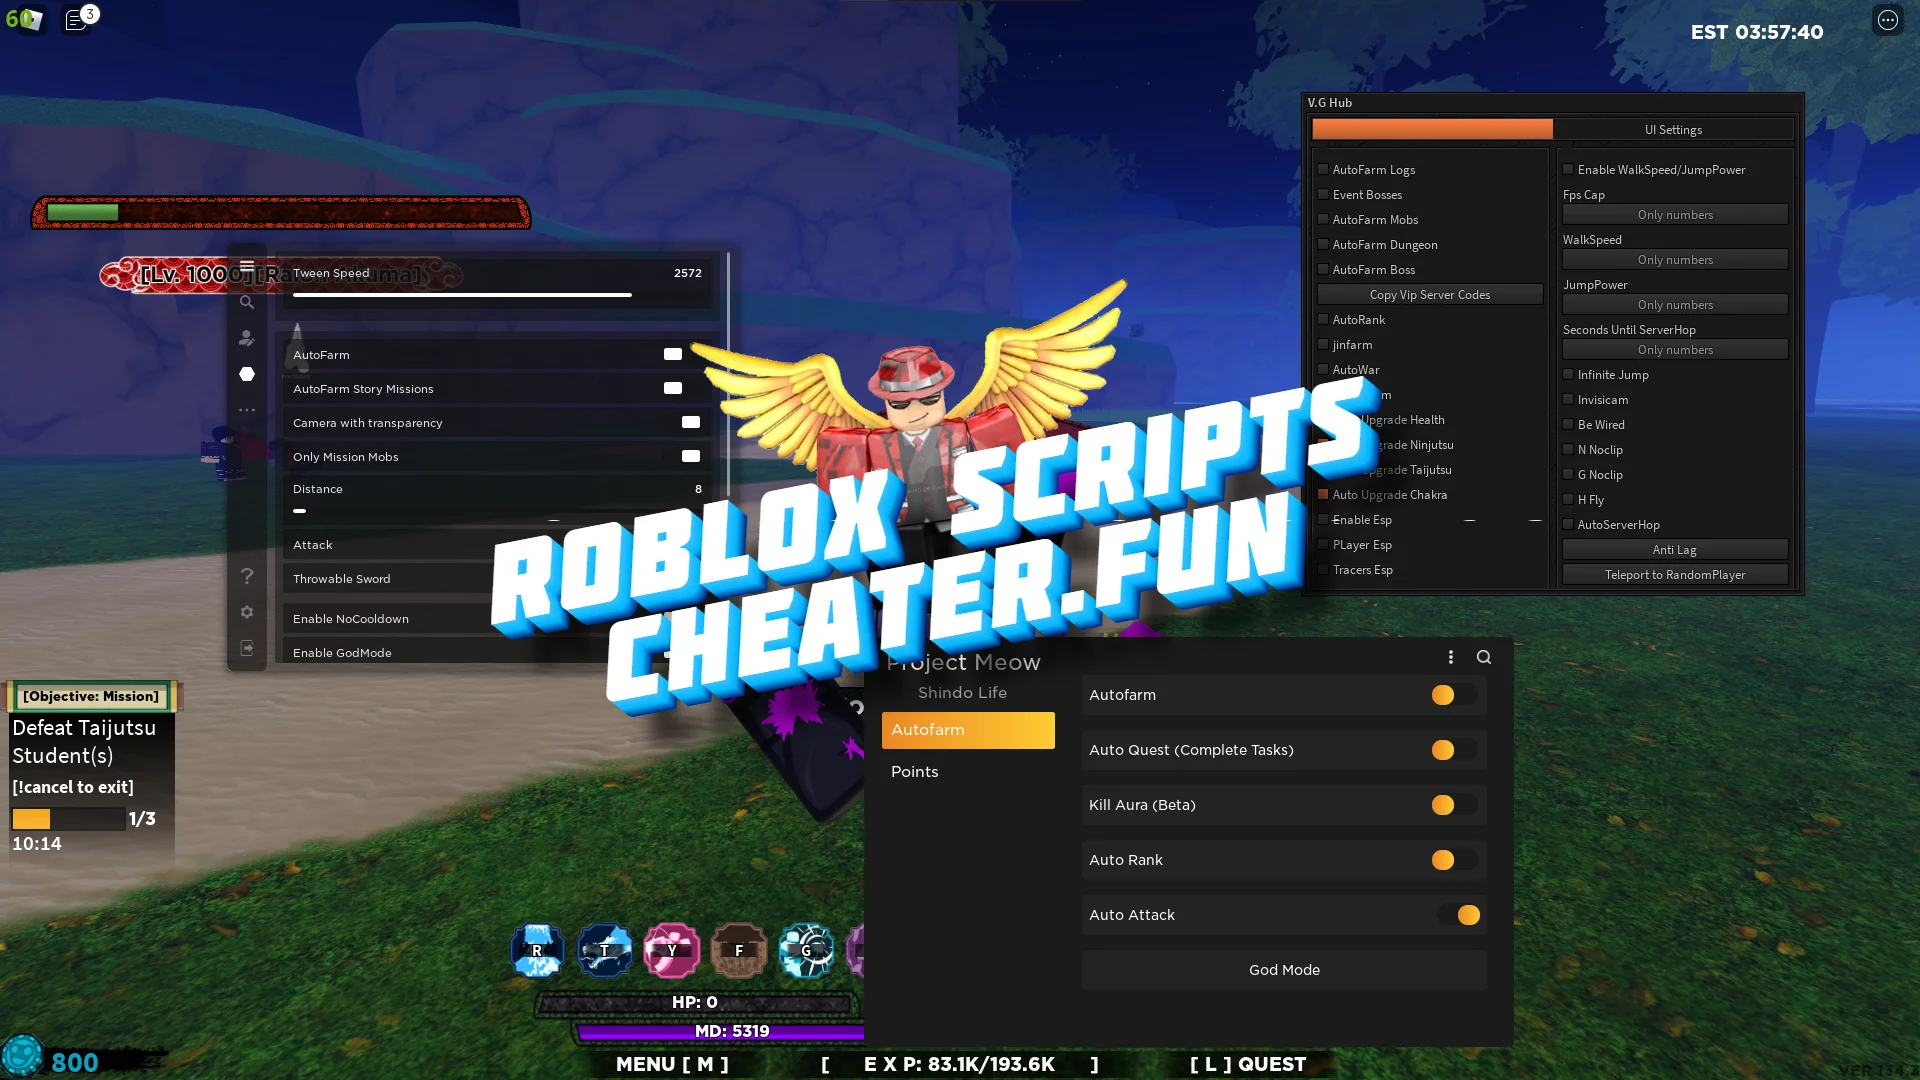 The Best GUI Scripts for Shindo Life Roblox